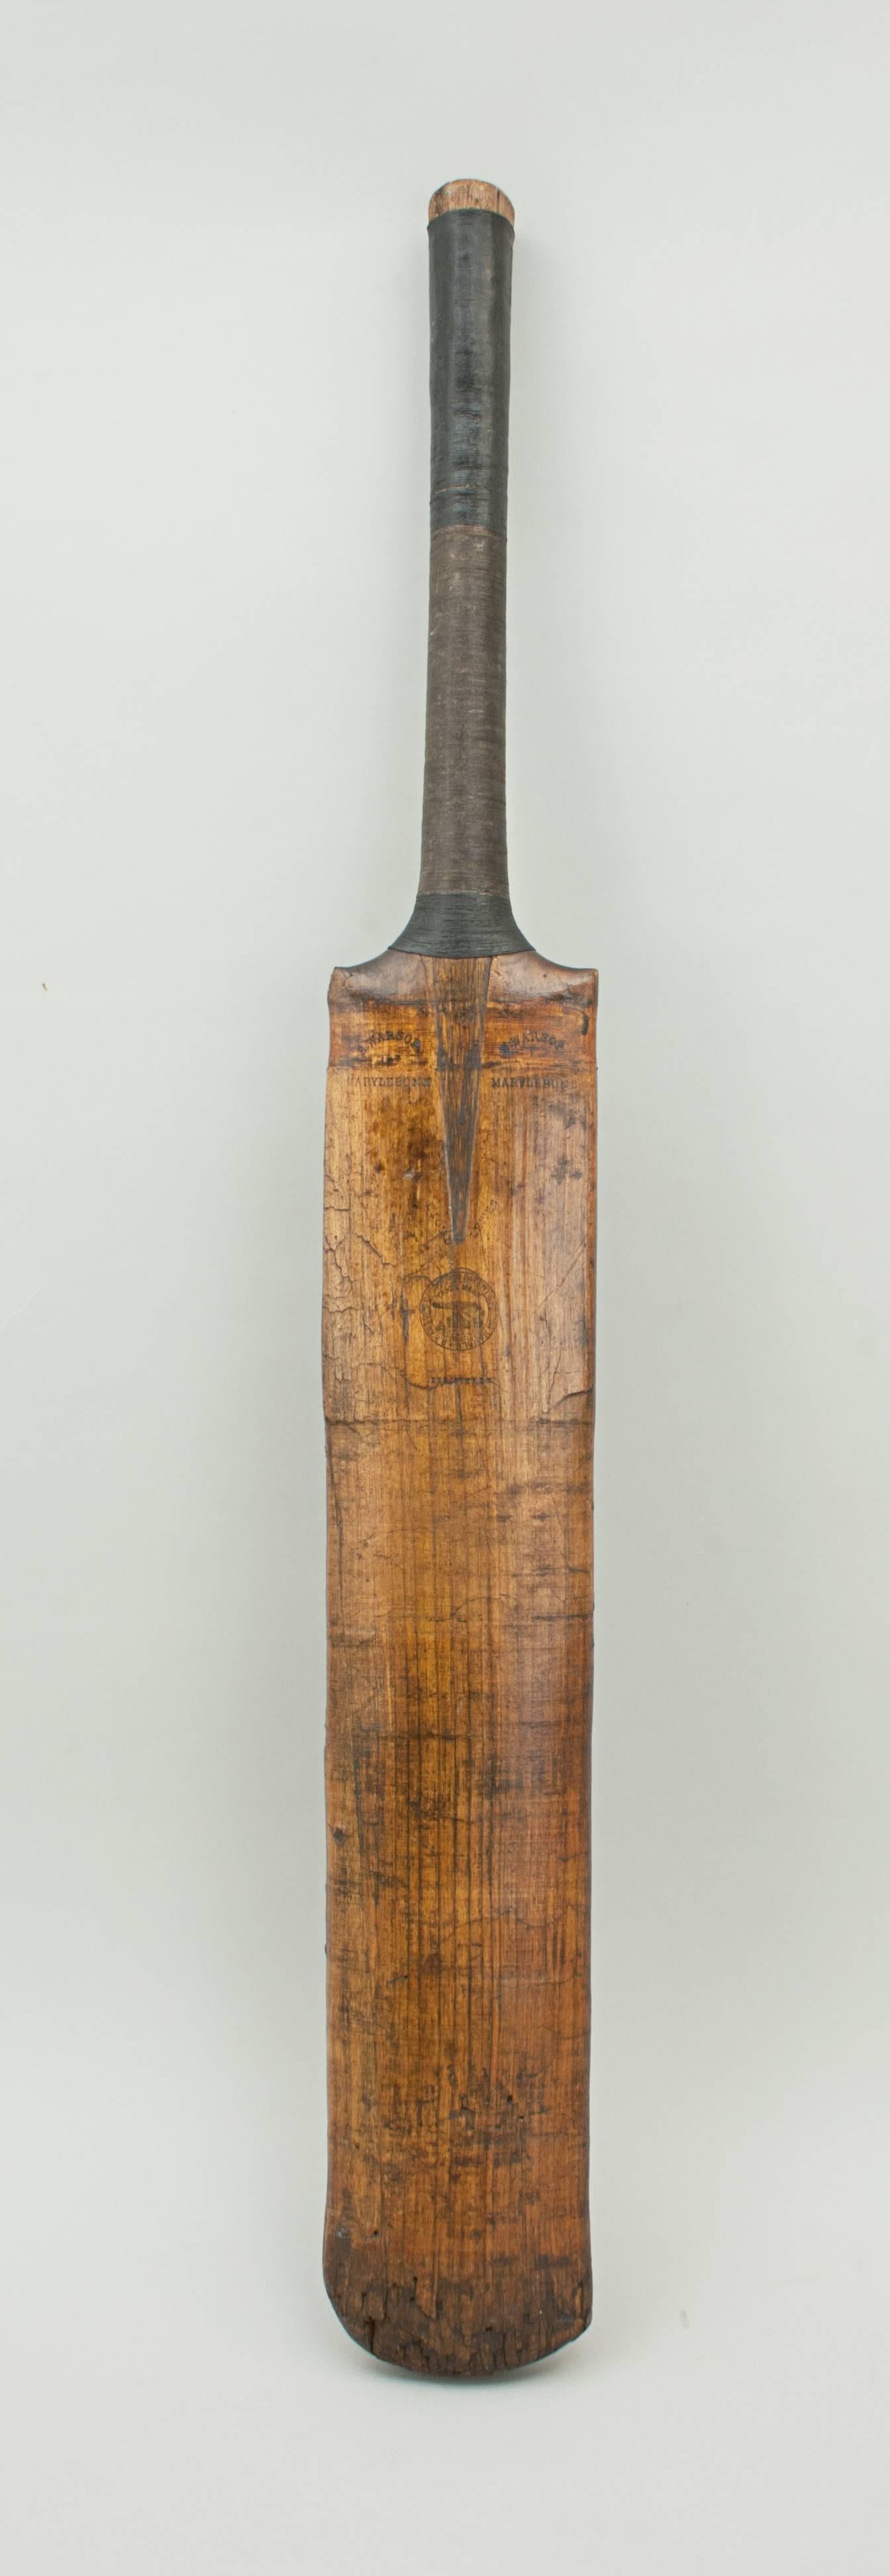 Victorian cricket bat with silver shield, 1887.
A good early willow cricket bat made by B. Warsop, Marylebone, England. The bat has a rounded back, cord strung handle and very attractive patination. The shoulders are embossed with the maker's name